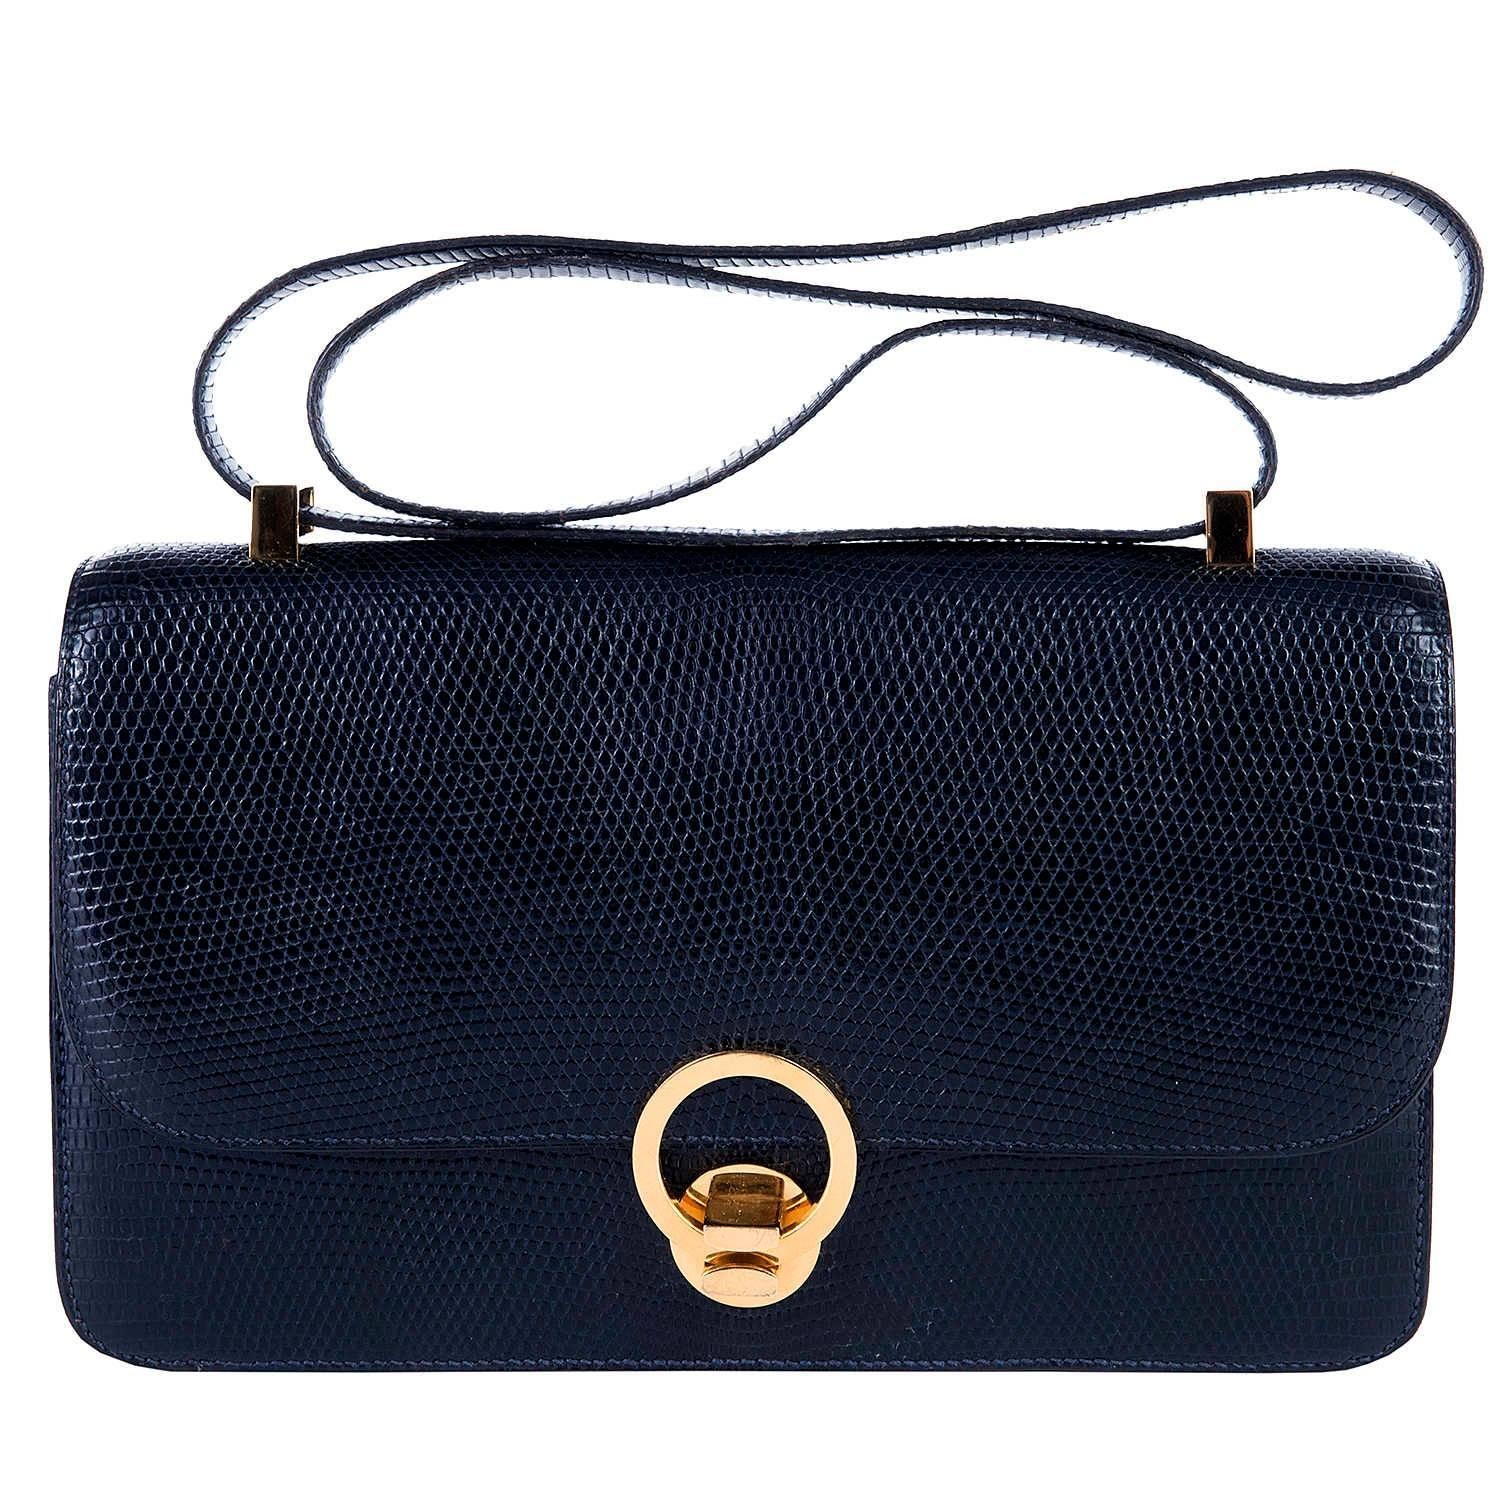 An Absolutely Stunning Vintage Hermes 'Sac Ring' Shoulder Bag finished in Navy Blue Lizard with Gold Hardware. This rare Hermes Bag was styled on the coveted Hermes Constance bag and is the same size and shape with an identical 'Double-up' strap. In